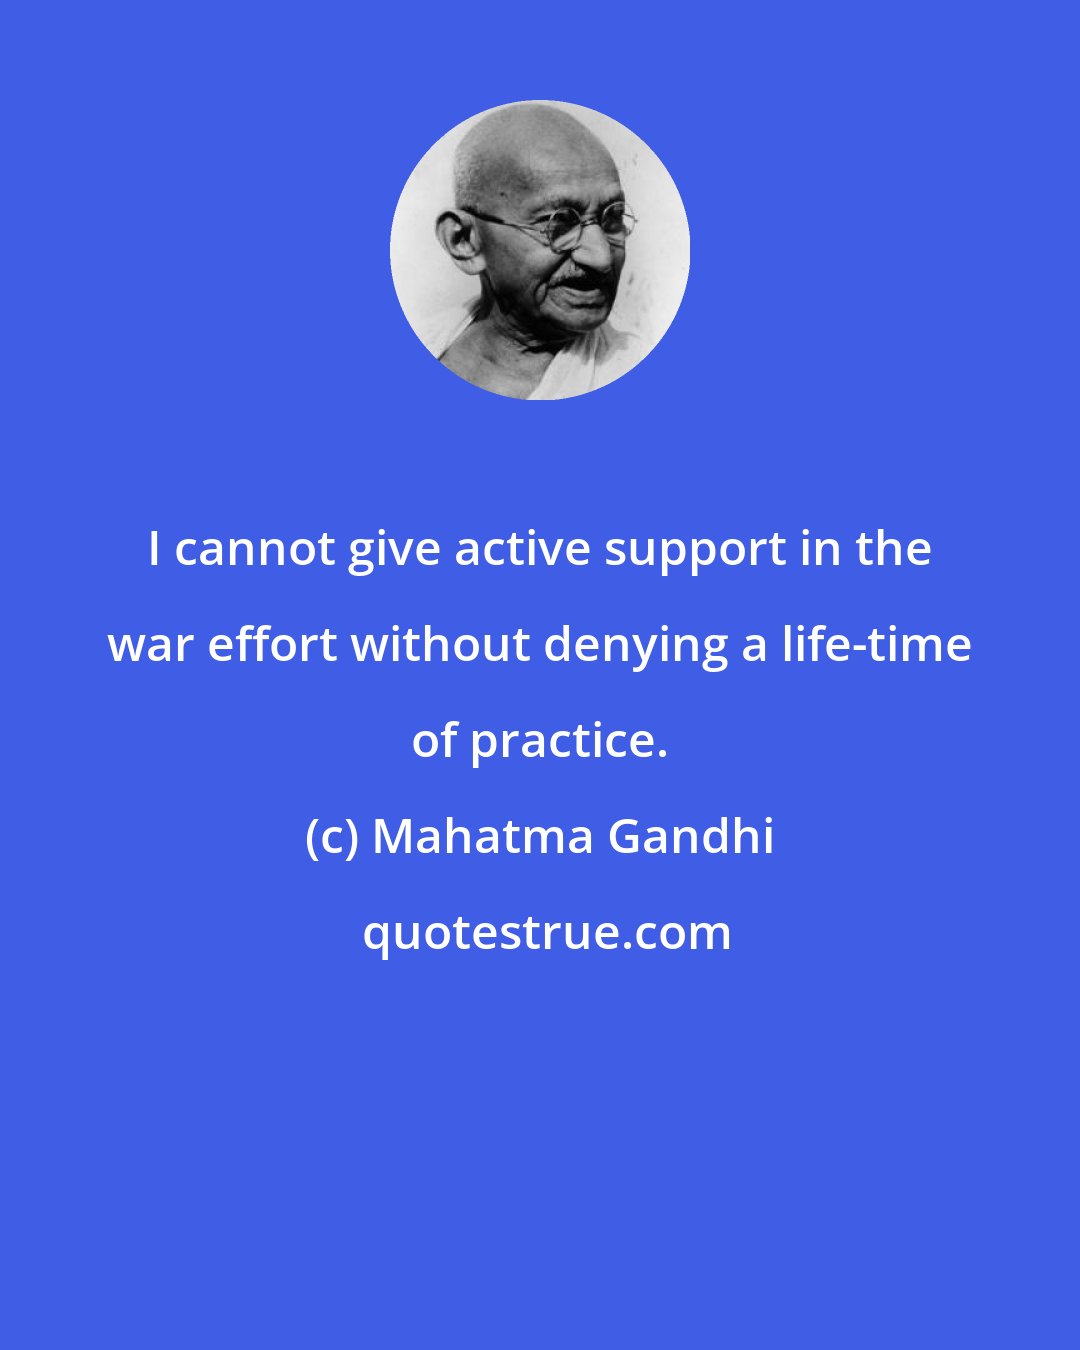 Mahatma Gandhi: I cannot give active support in the war effort without denying a life-time of practice.